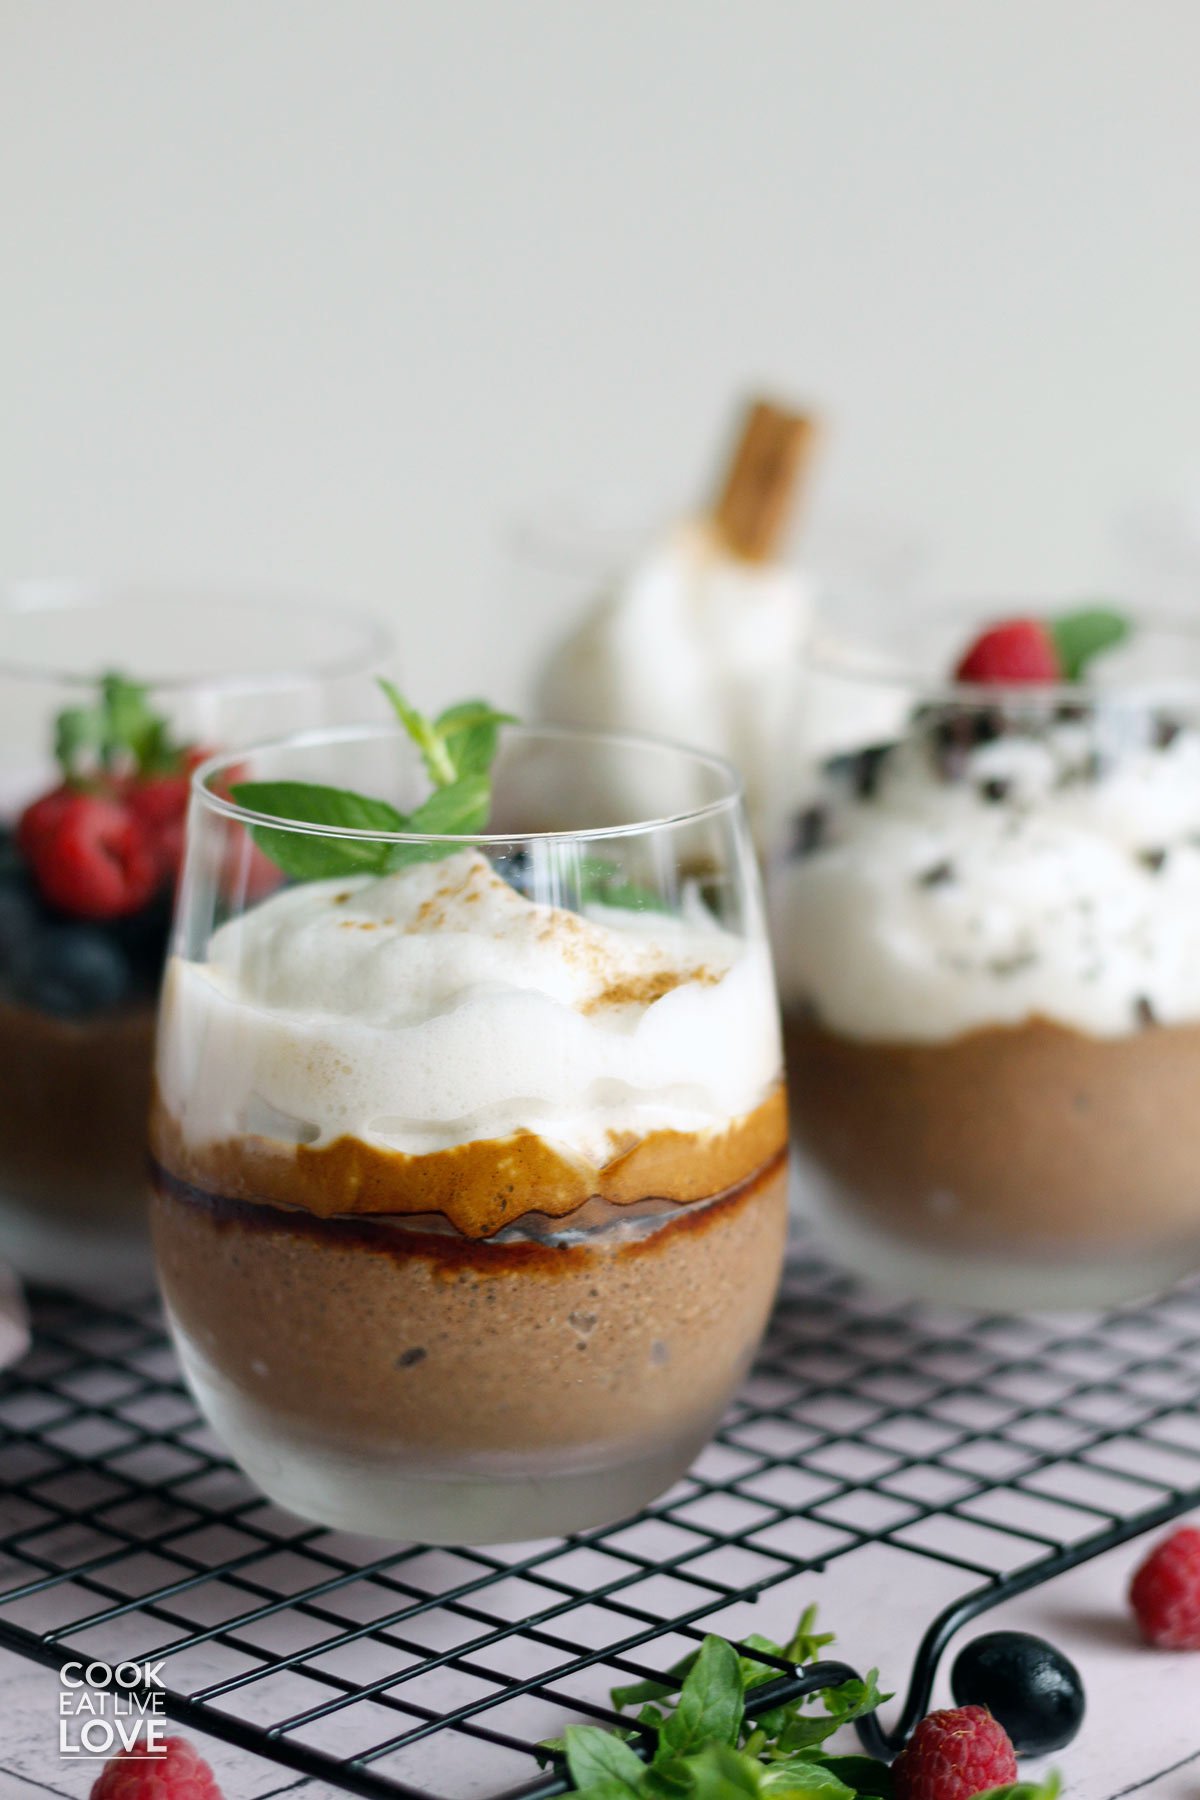 Chocolate chia seed pudding with coconut milk in glasses with different toppings.